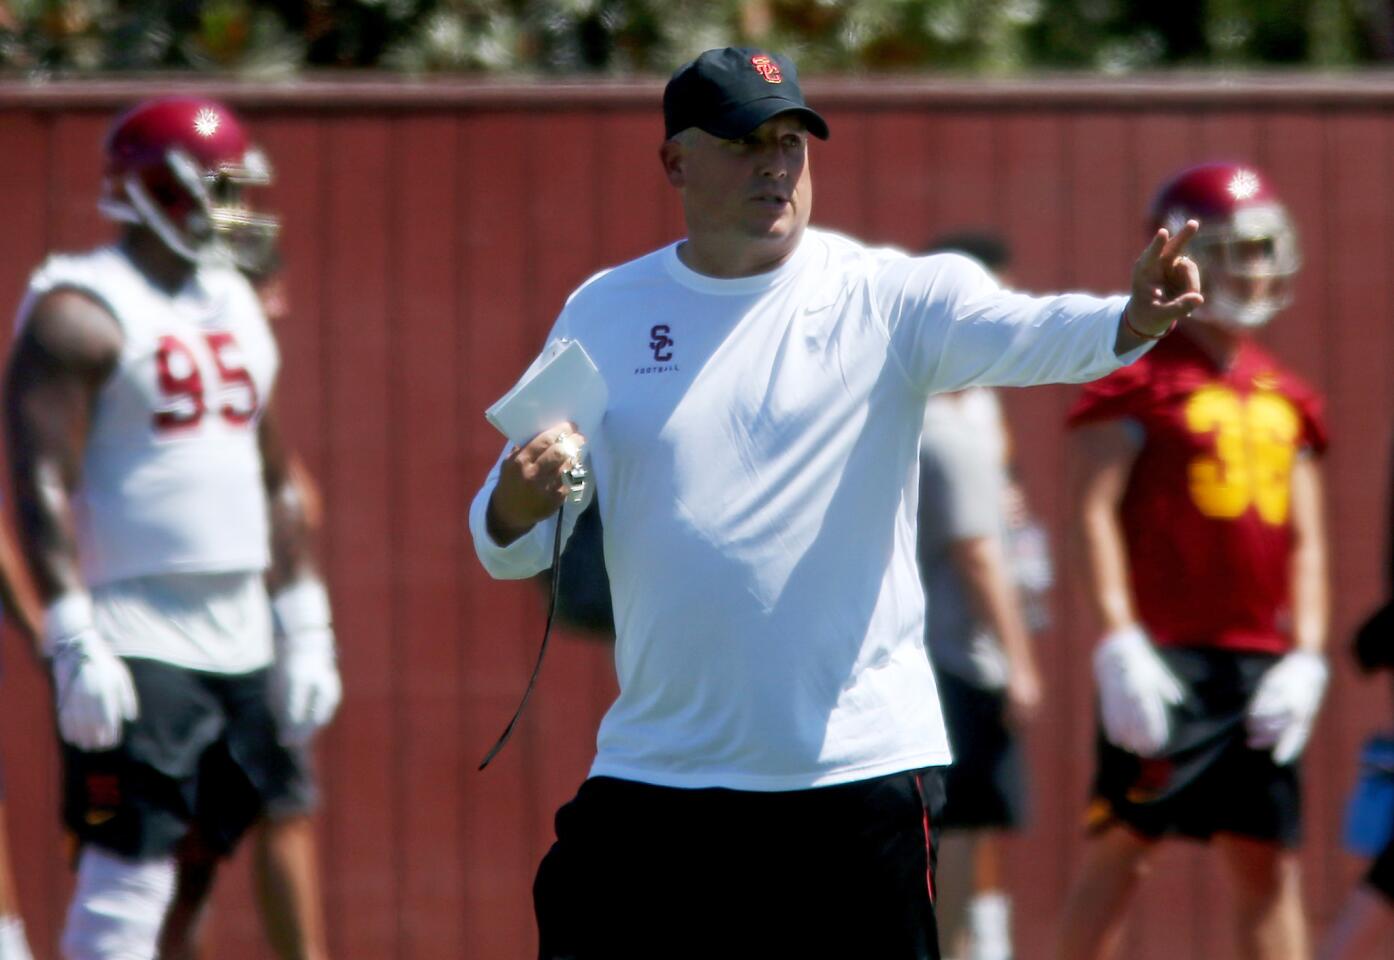 USC coach Clay Helton guides players through a workout during the summer camp opener.